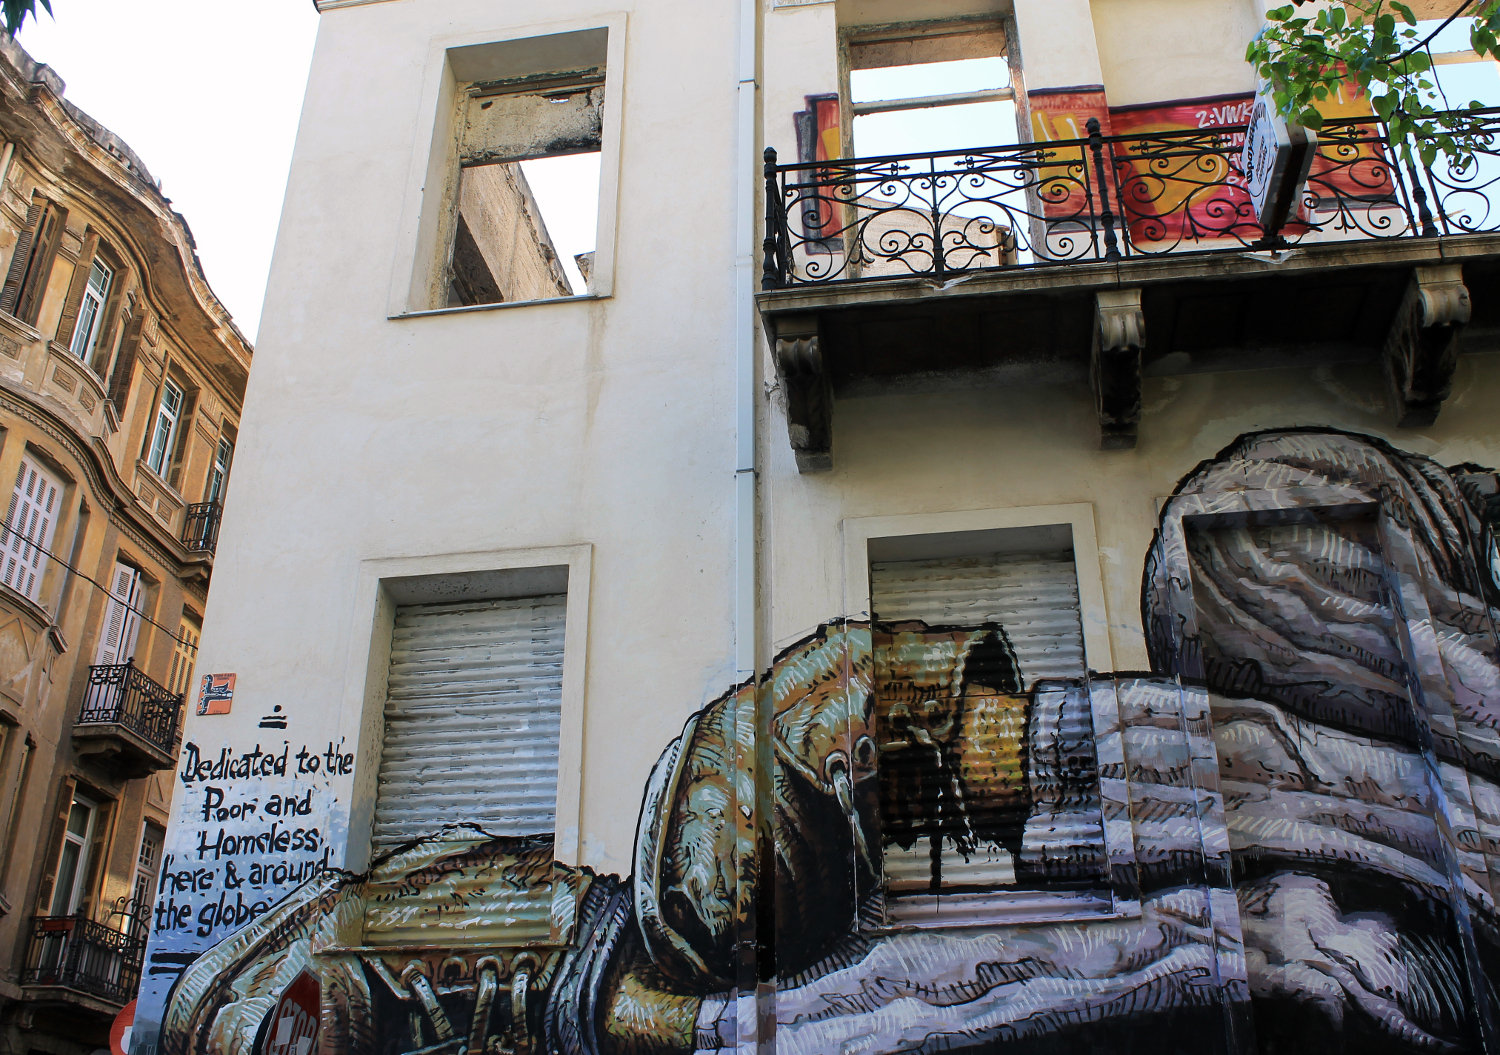 Wild Drawing paints a new mural in Athens "No land for the Poor"